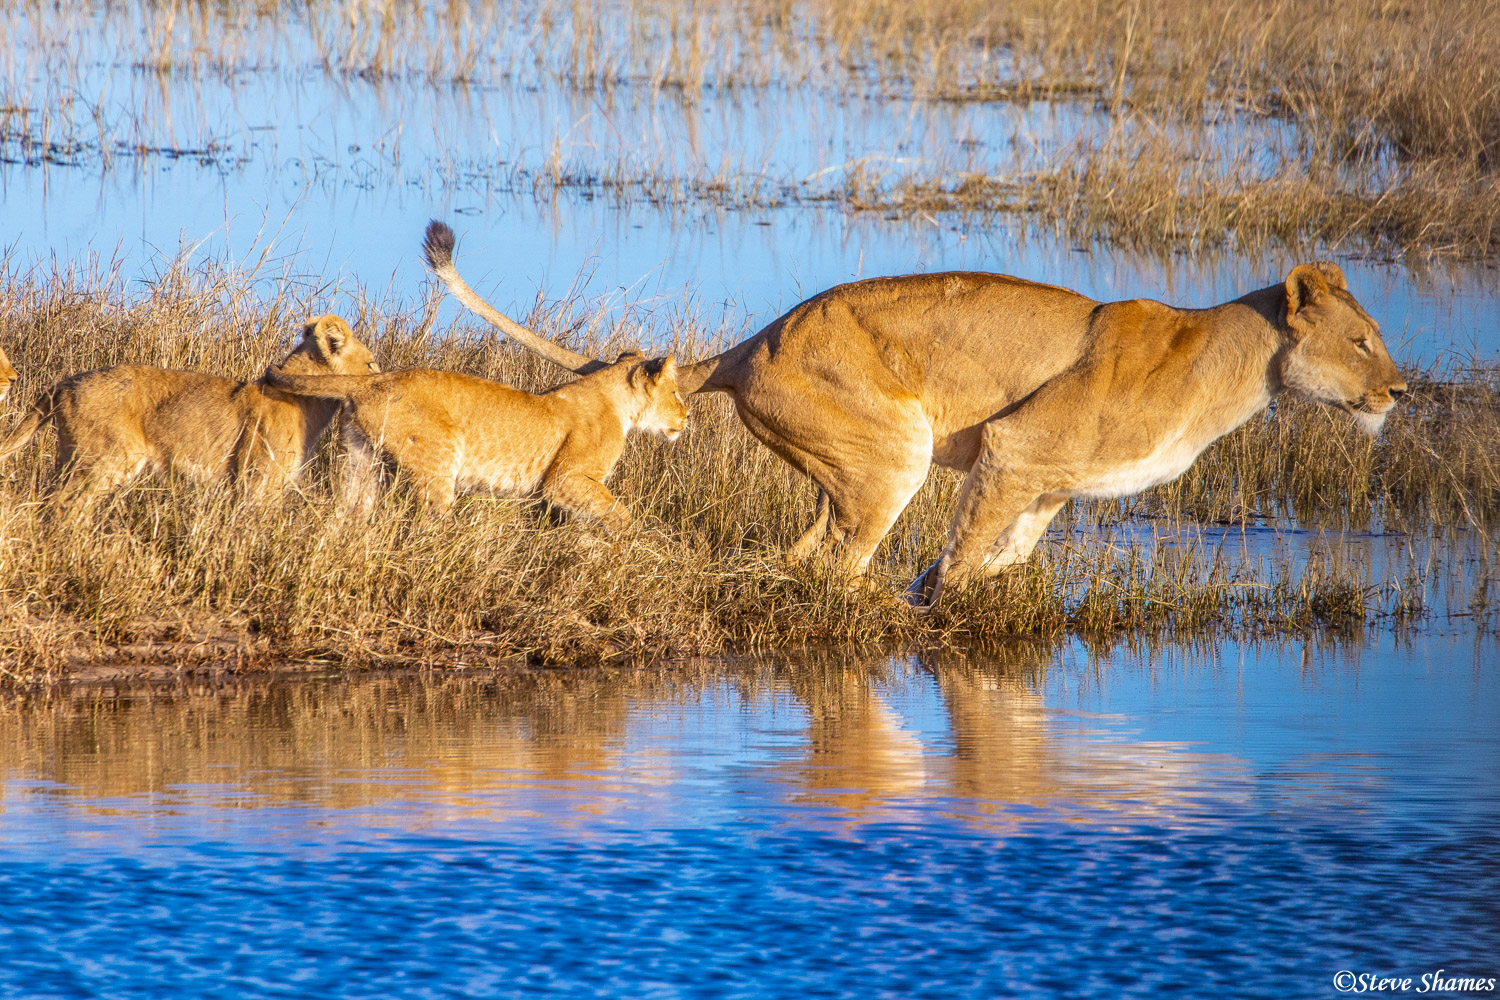 Leaping lioness at the Chobe River in Botswana.